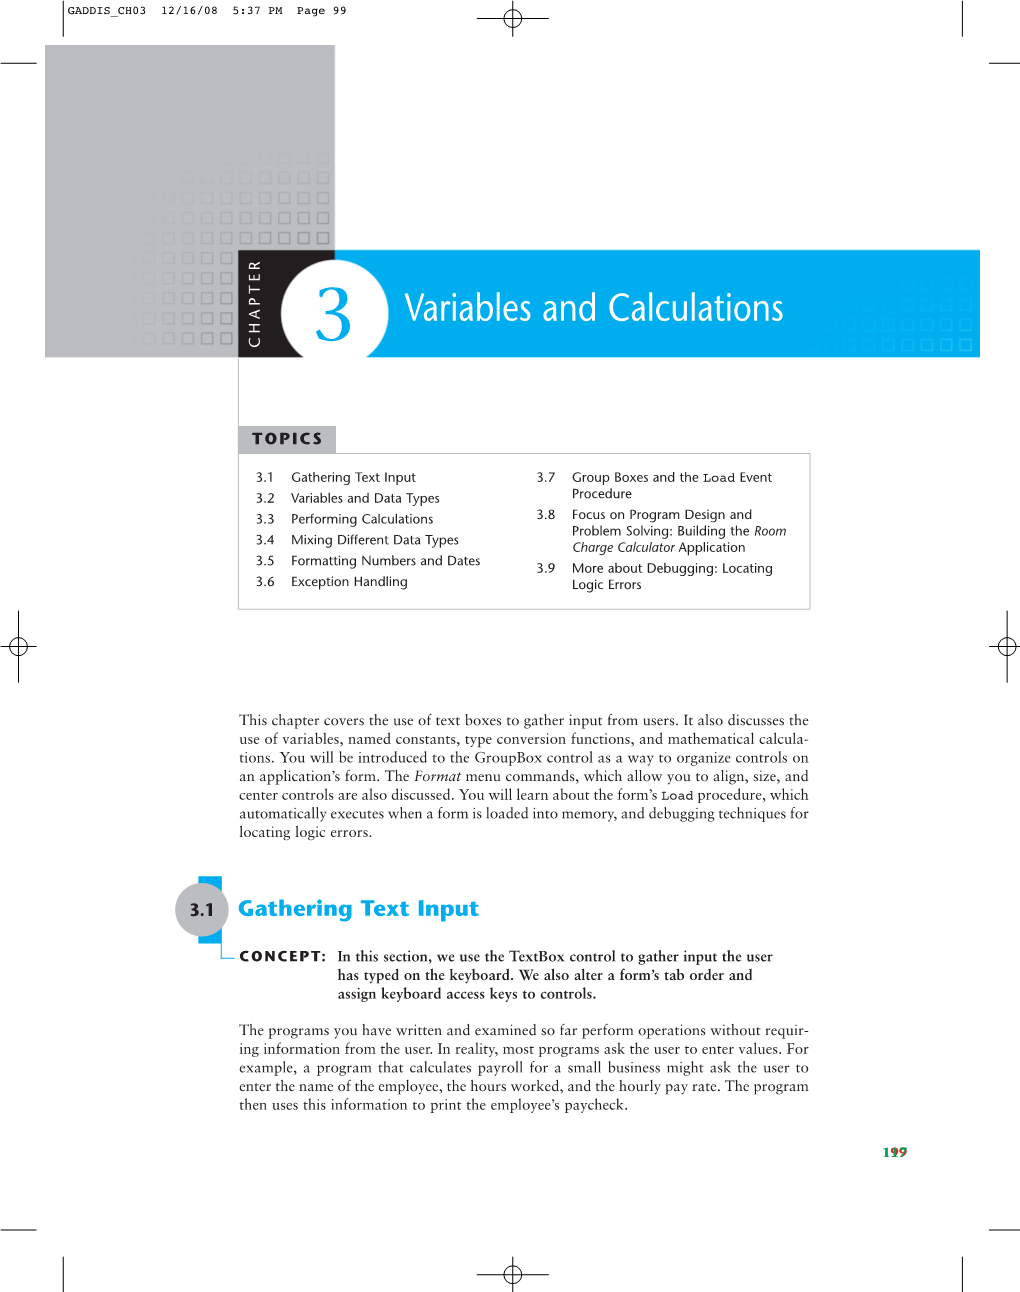 Variables and Calculations